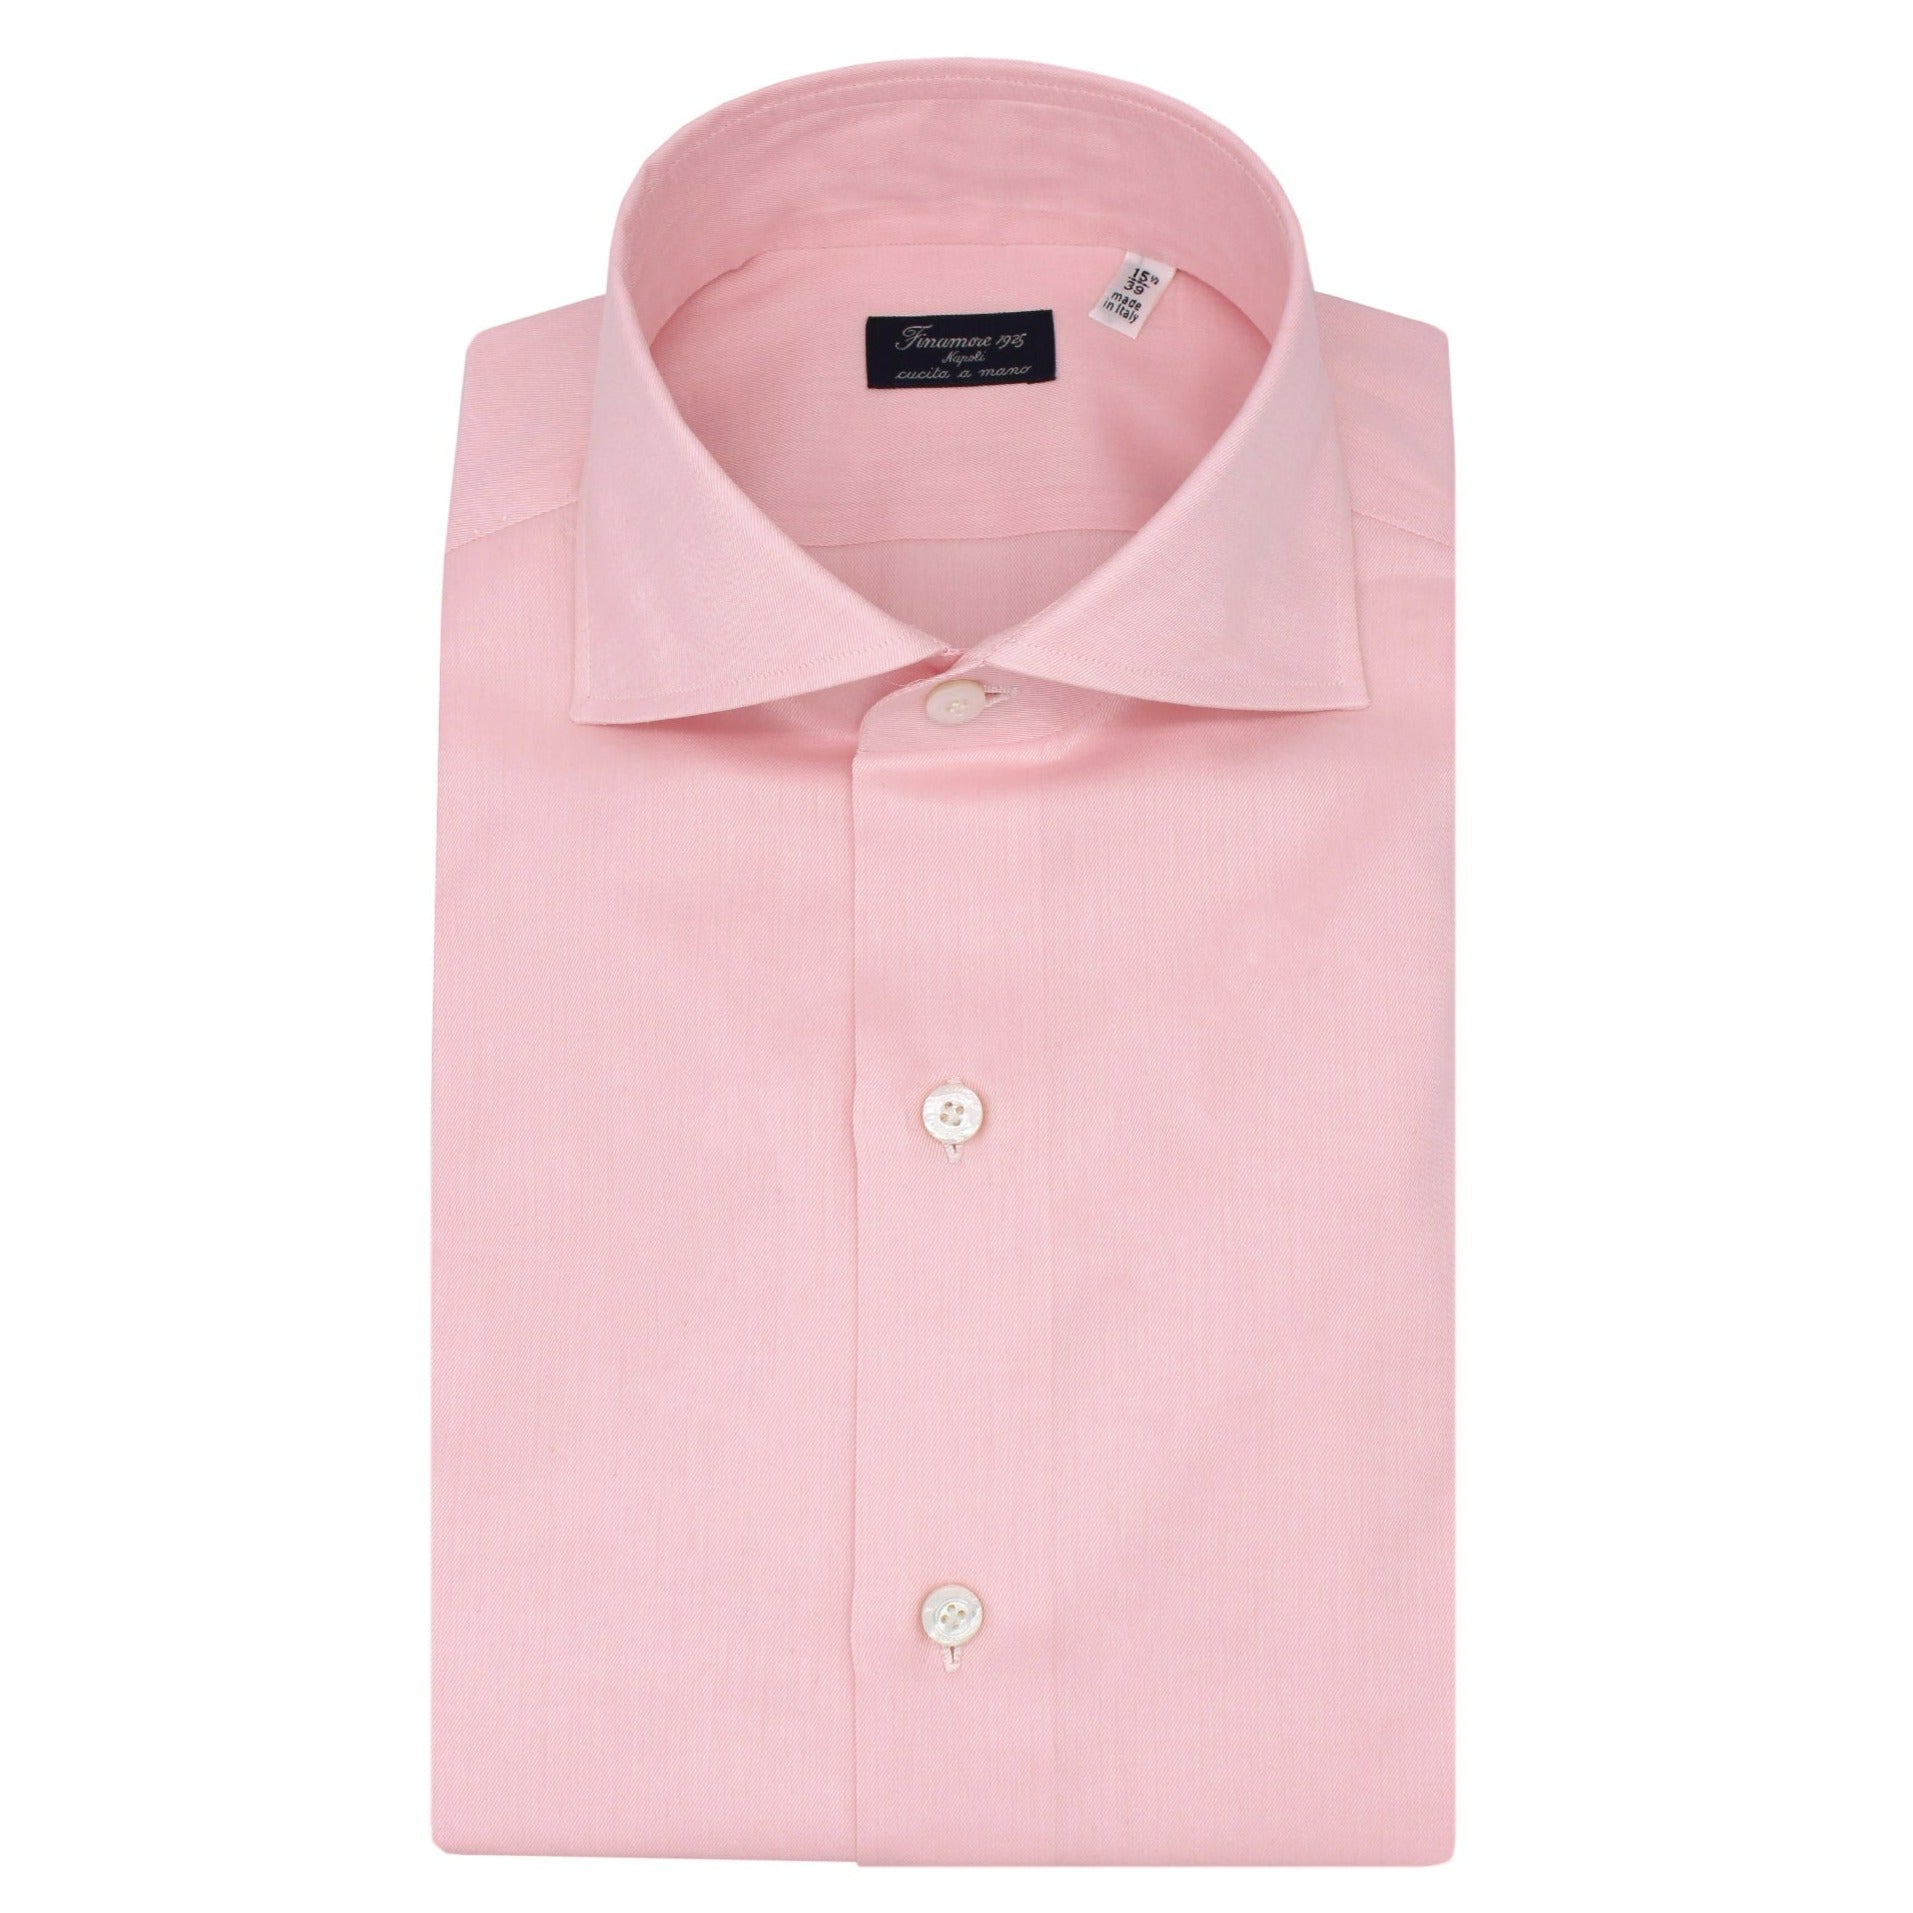 Classic fit Naples shirt in pink cotton twill